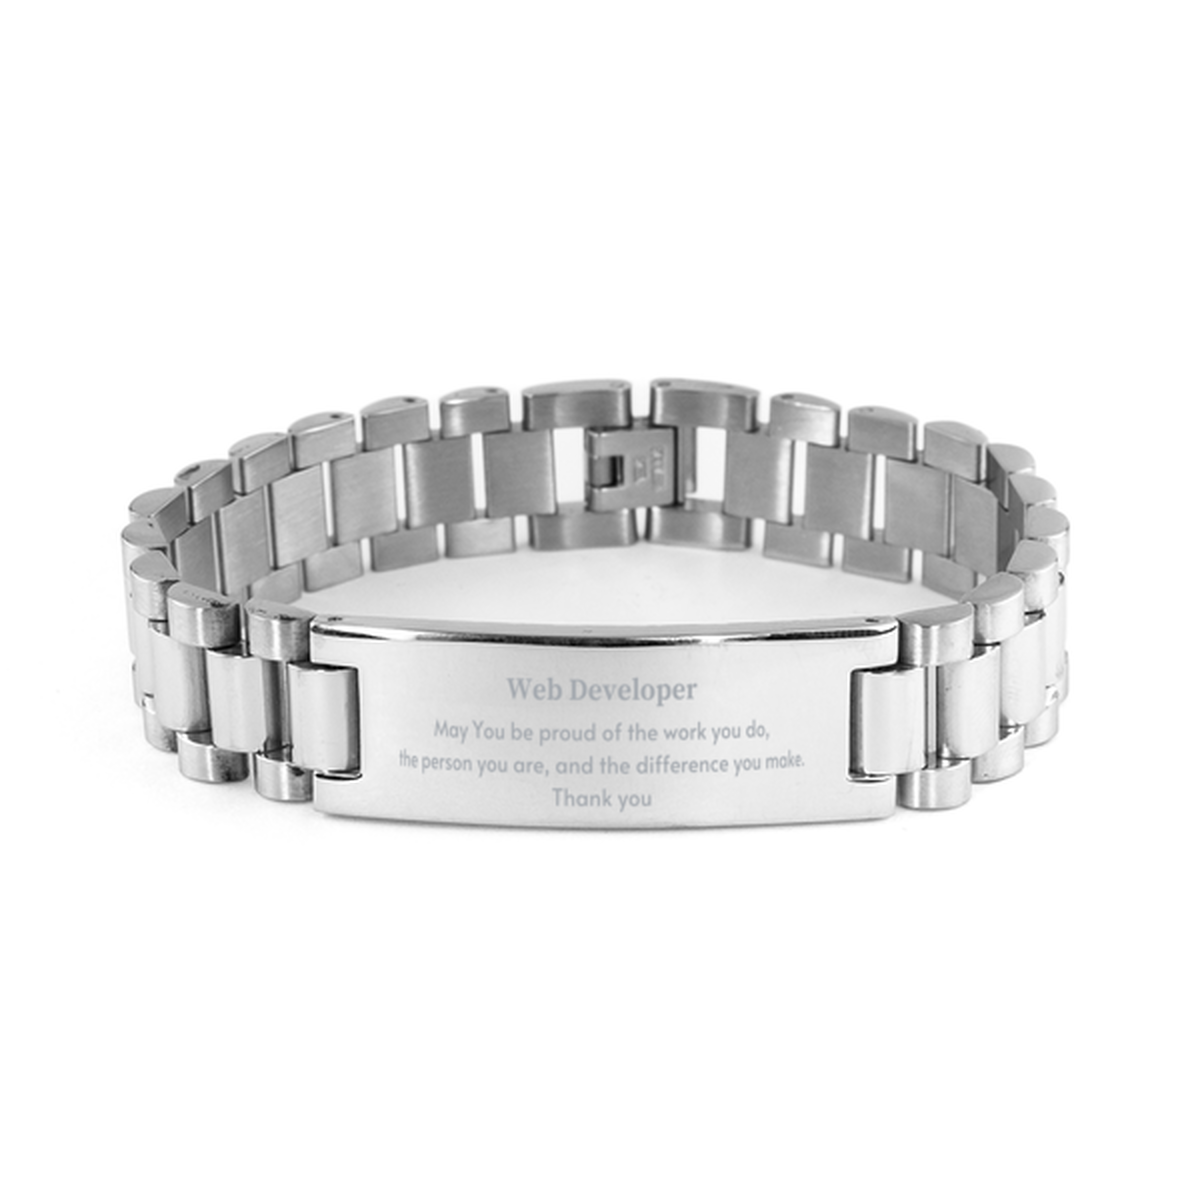 Heartwarming Ladder Stainless Steel Bracelet Retirement Coworkers Gifts for Web Developer, Web Developer May You be proud of the work you do, the person you are Gifts for Boss Men Women Friends